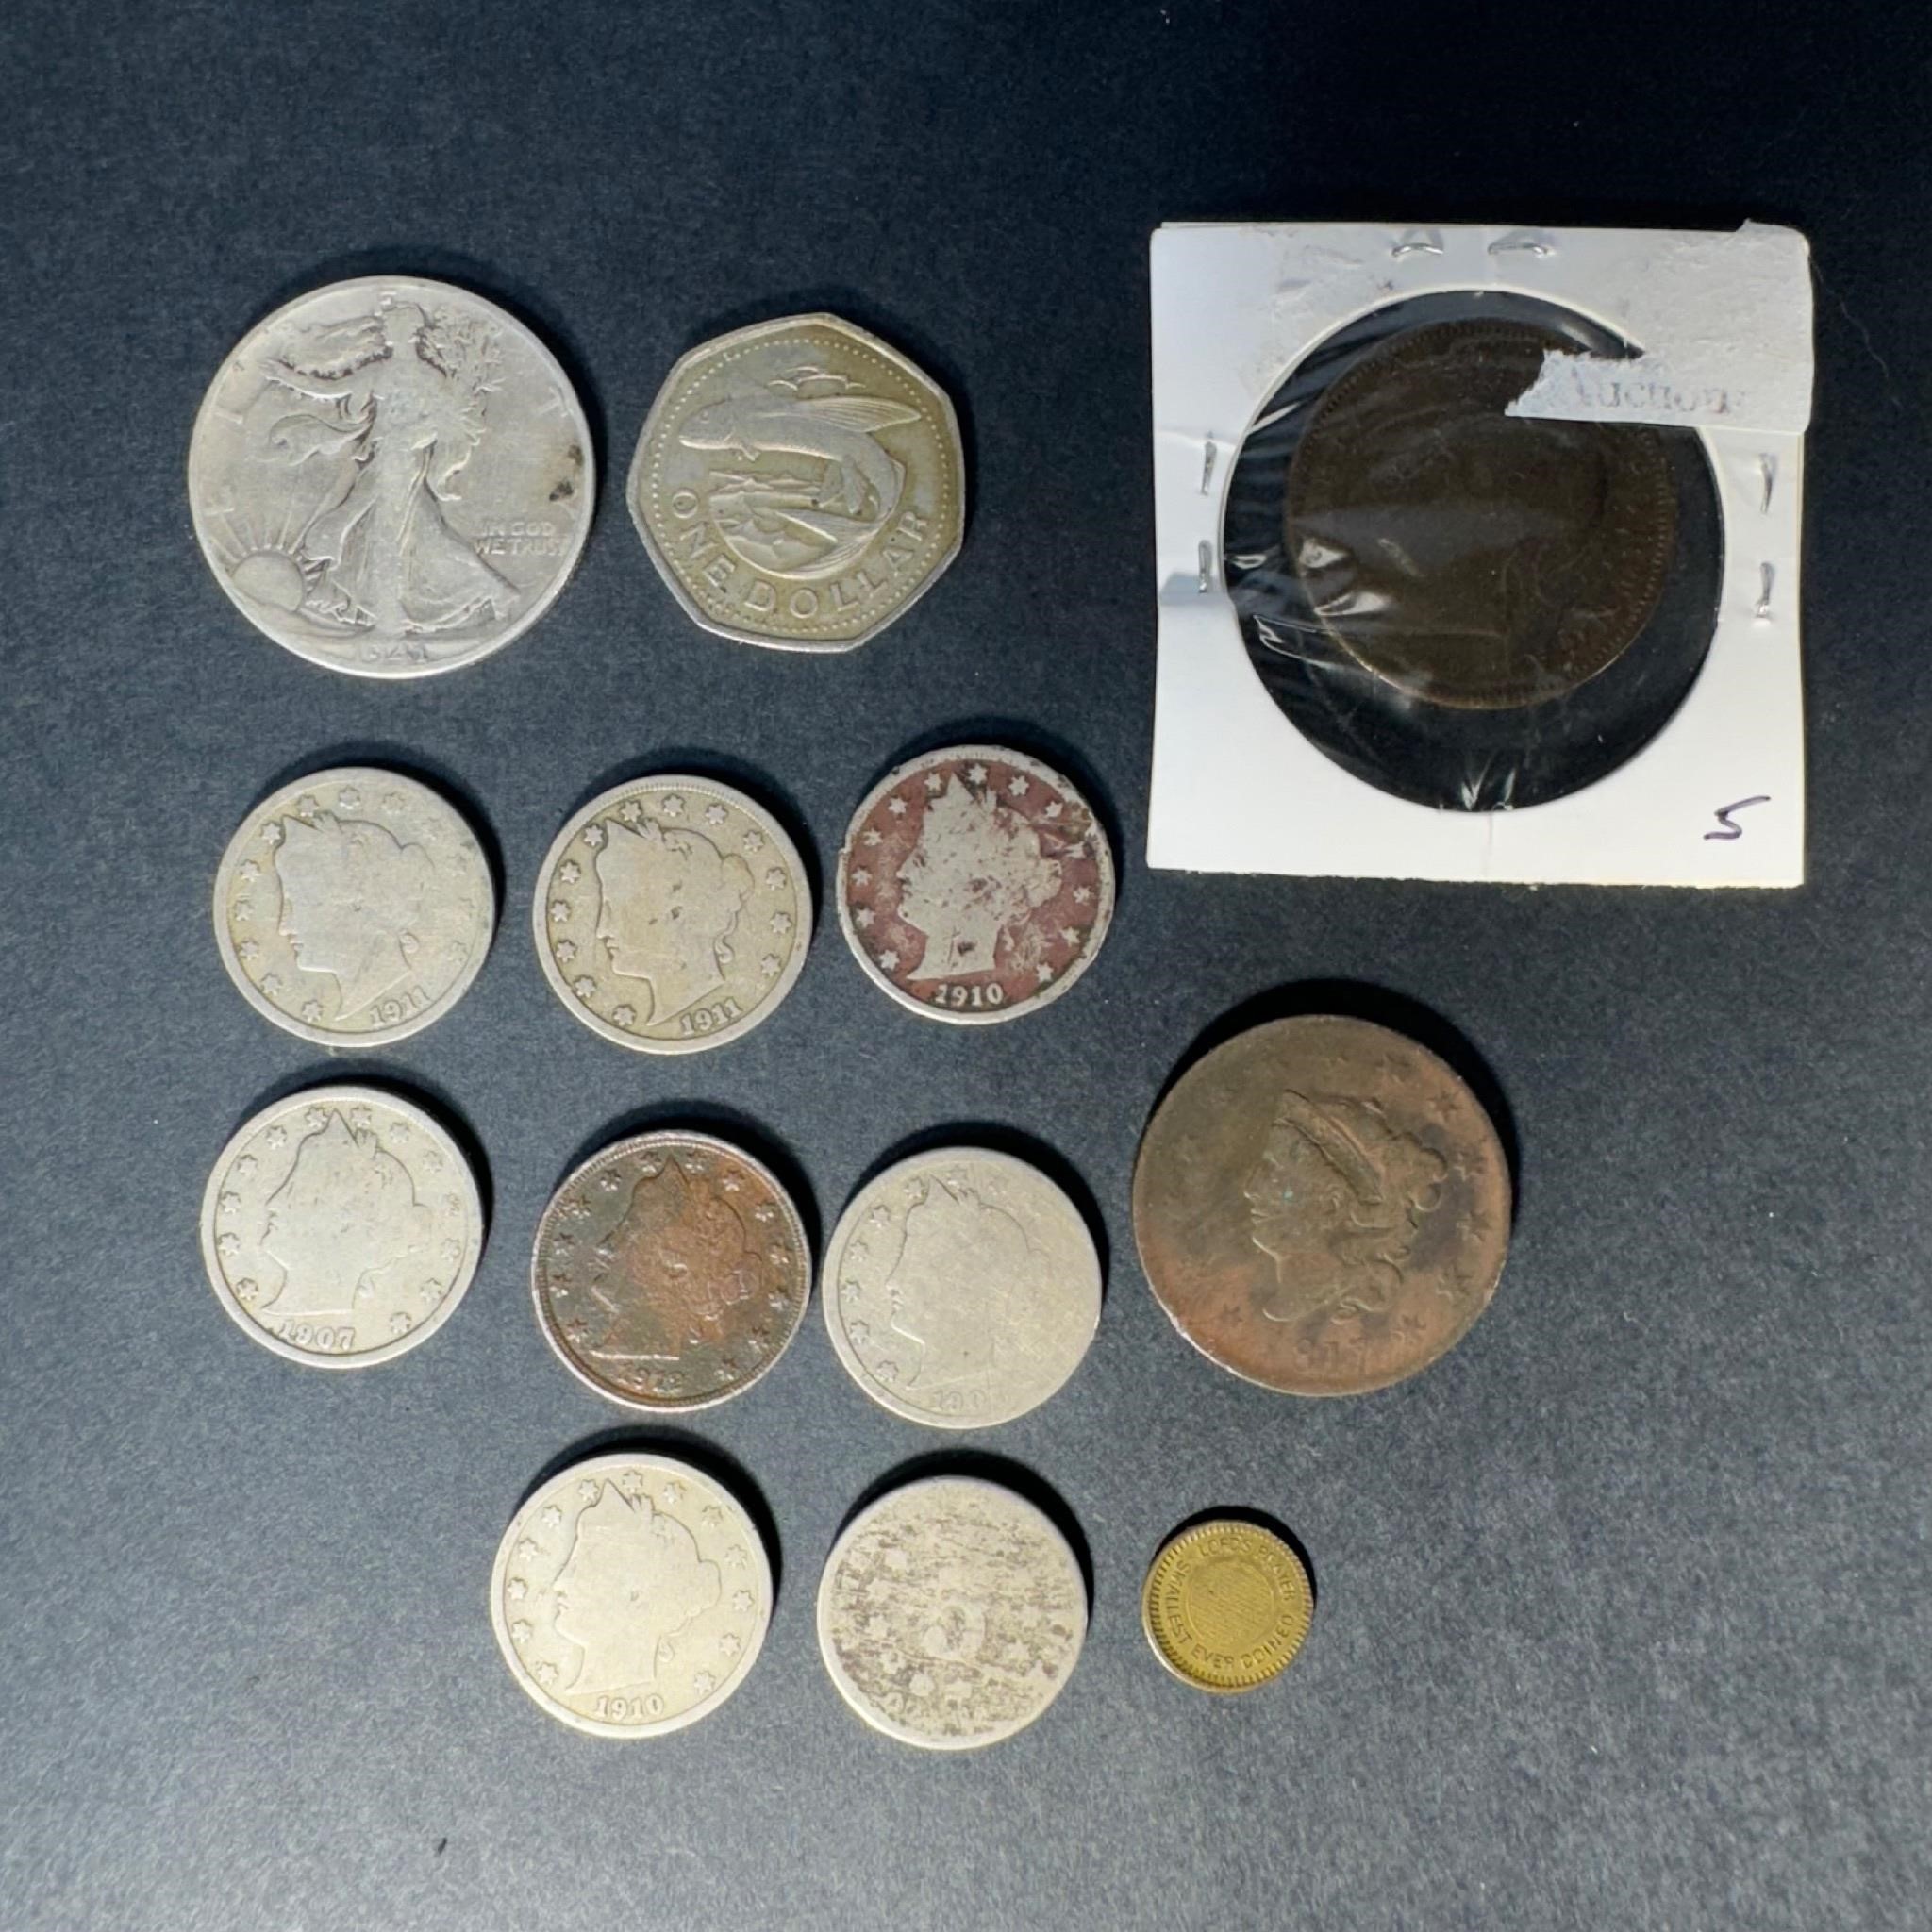 Older Coin Collection